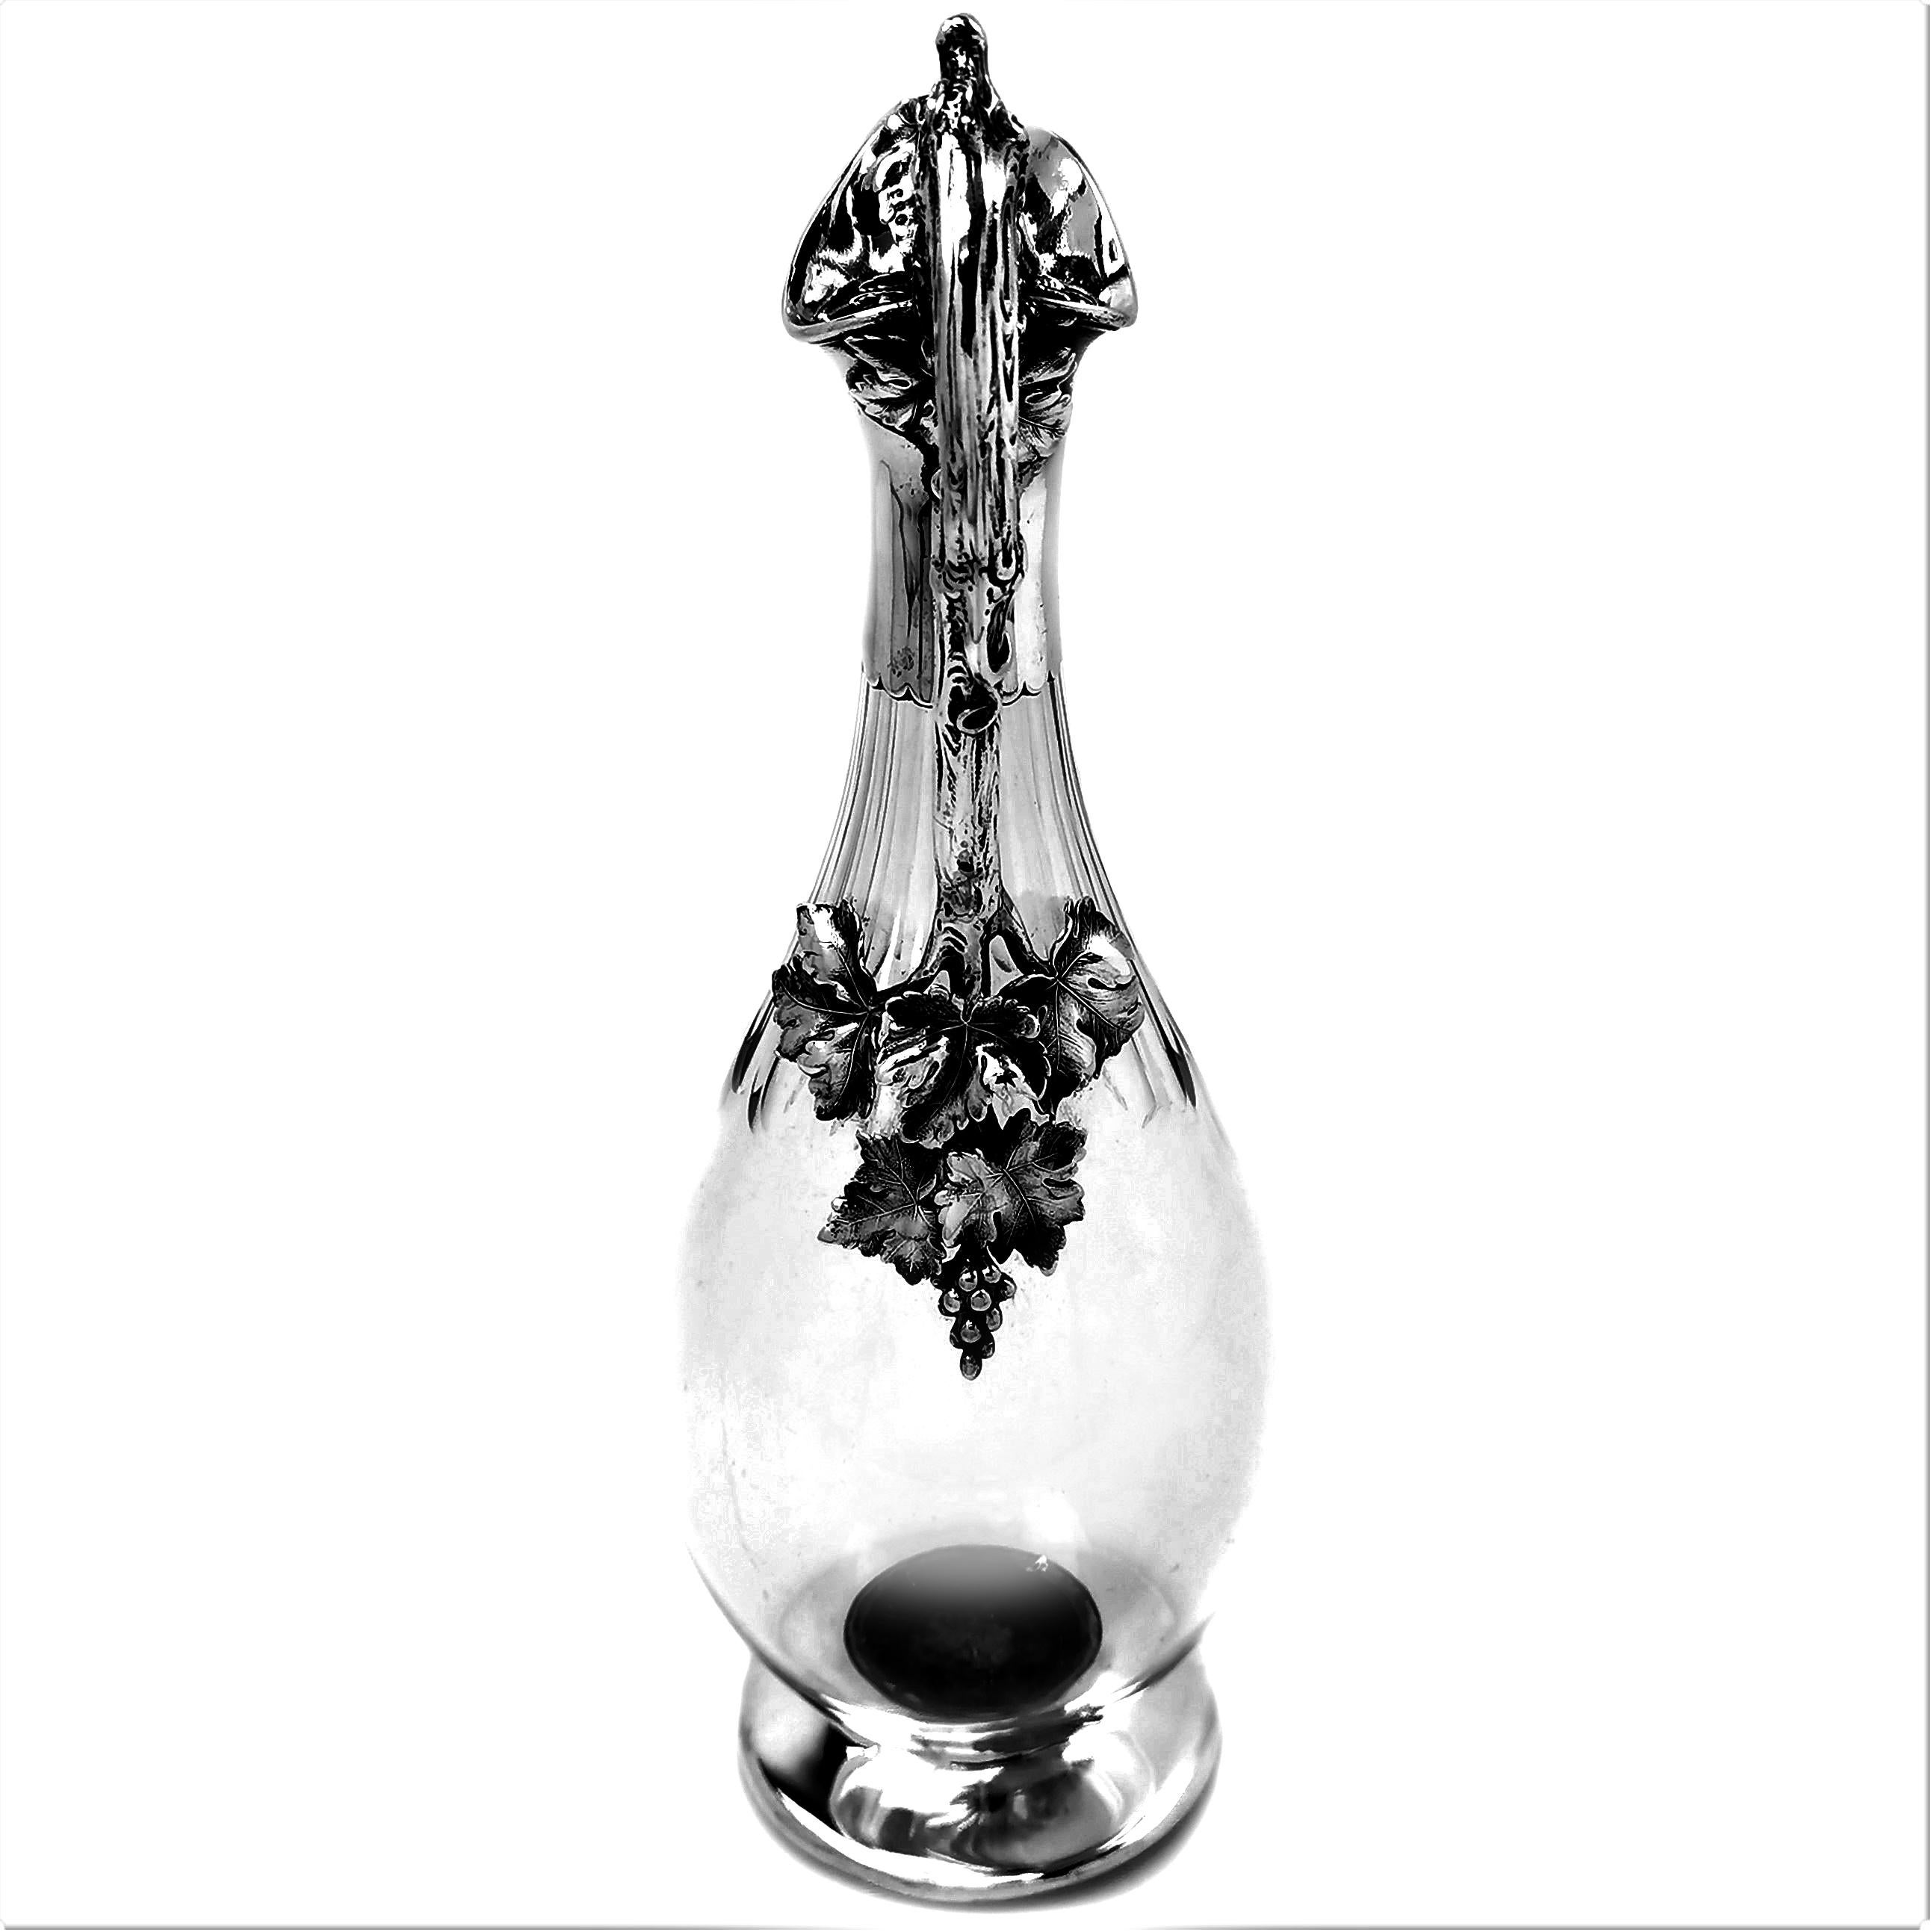 A magnificent Antique Victorian Sterling Silver Mounted Claret Jug with a clear glass body. The Jug boasts an impressive handle created in the shape of a vine branch with leaves and vines applied. The neck of the Jug and spread foot are plain